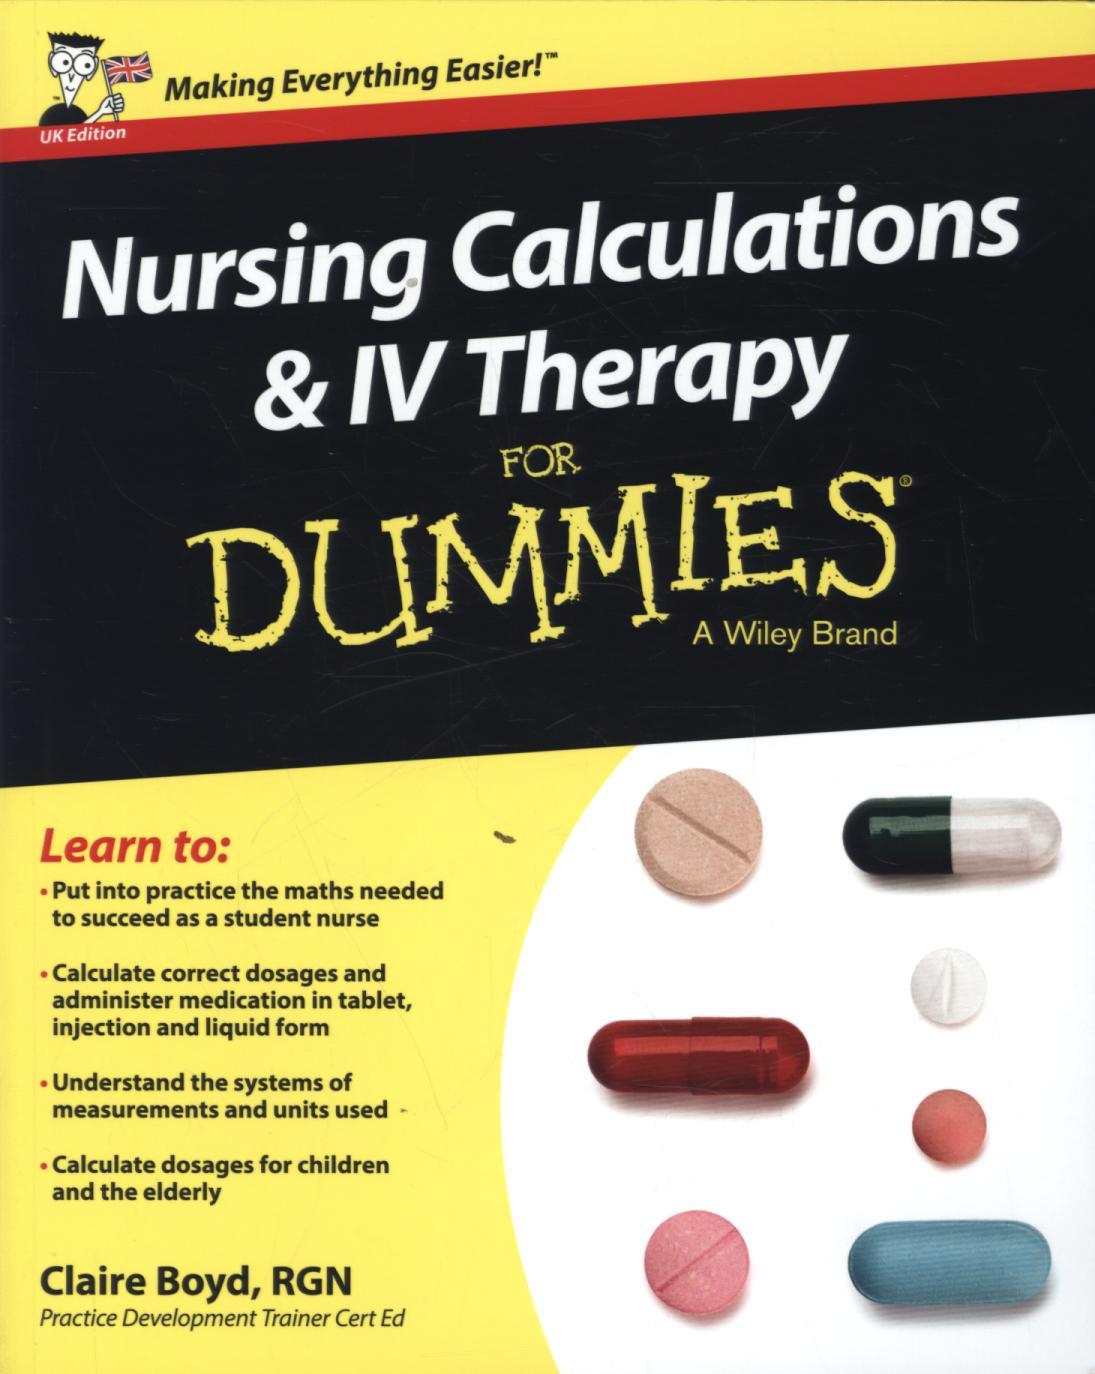 Nursing Calculations and IV Therapy For Dummies